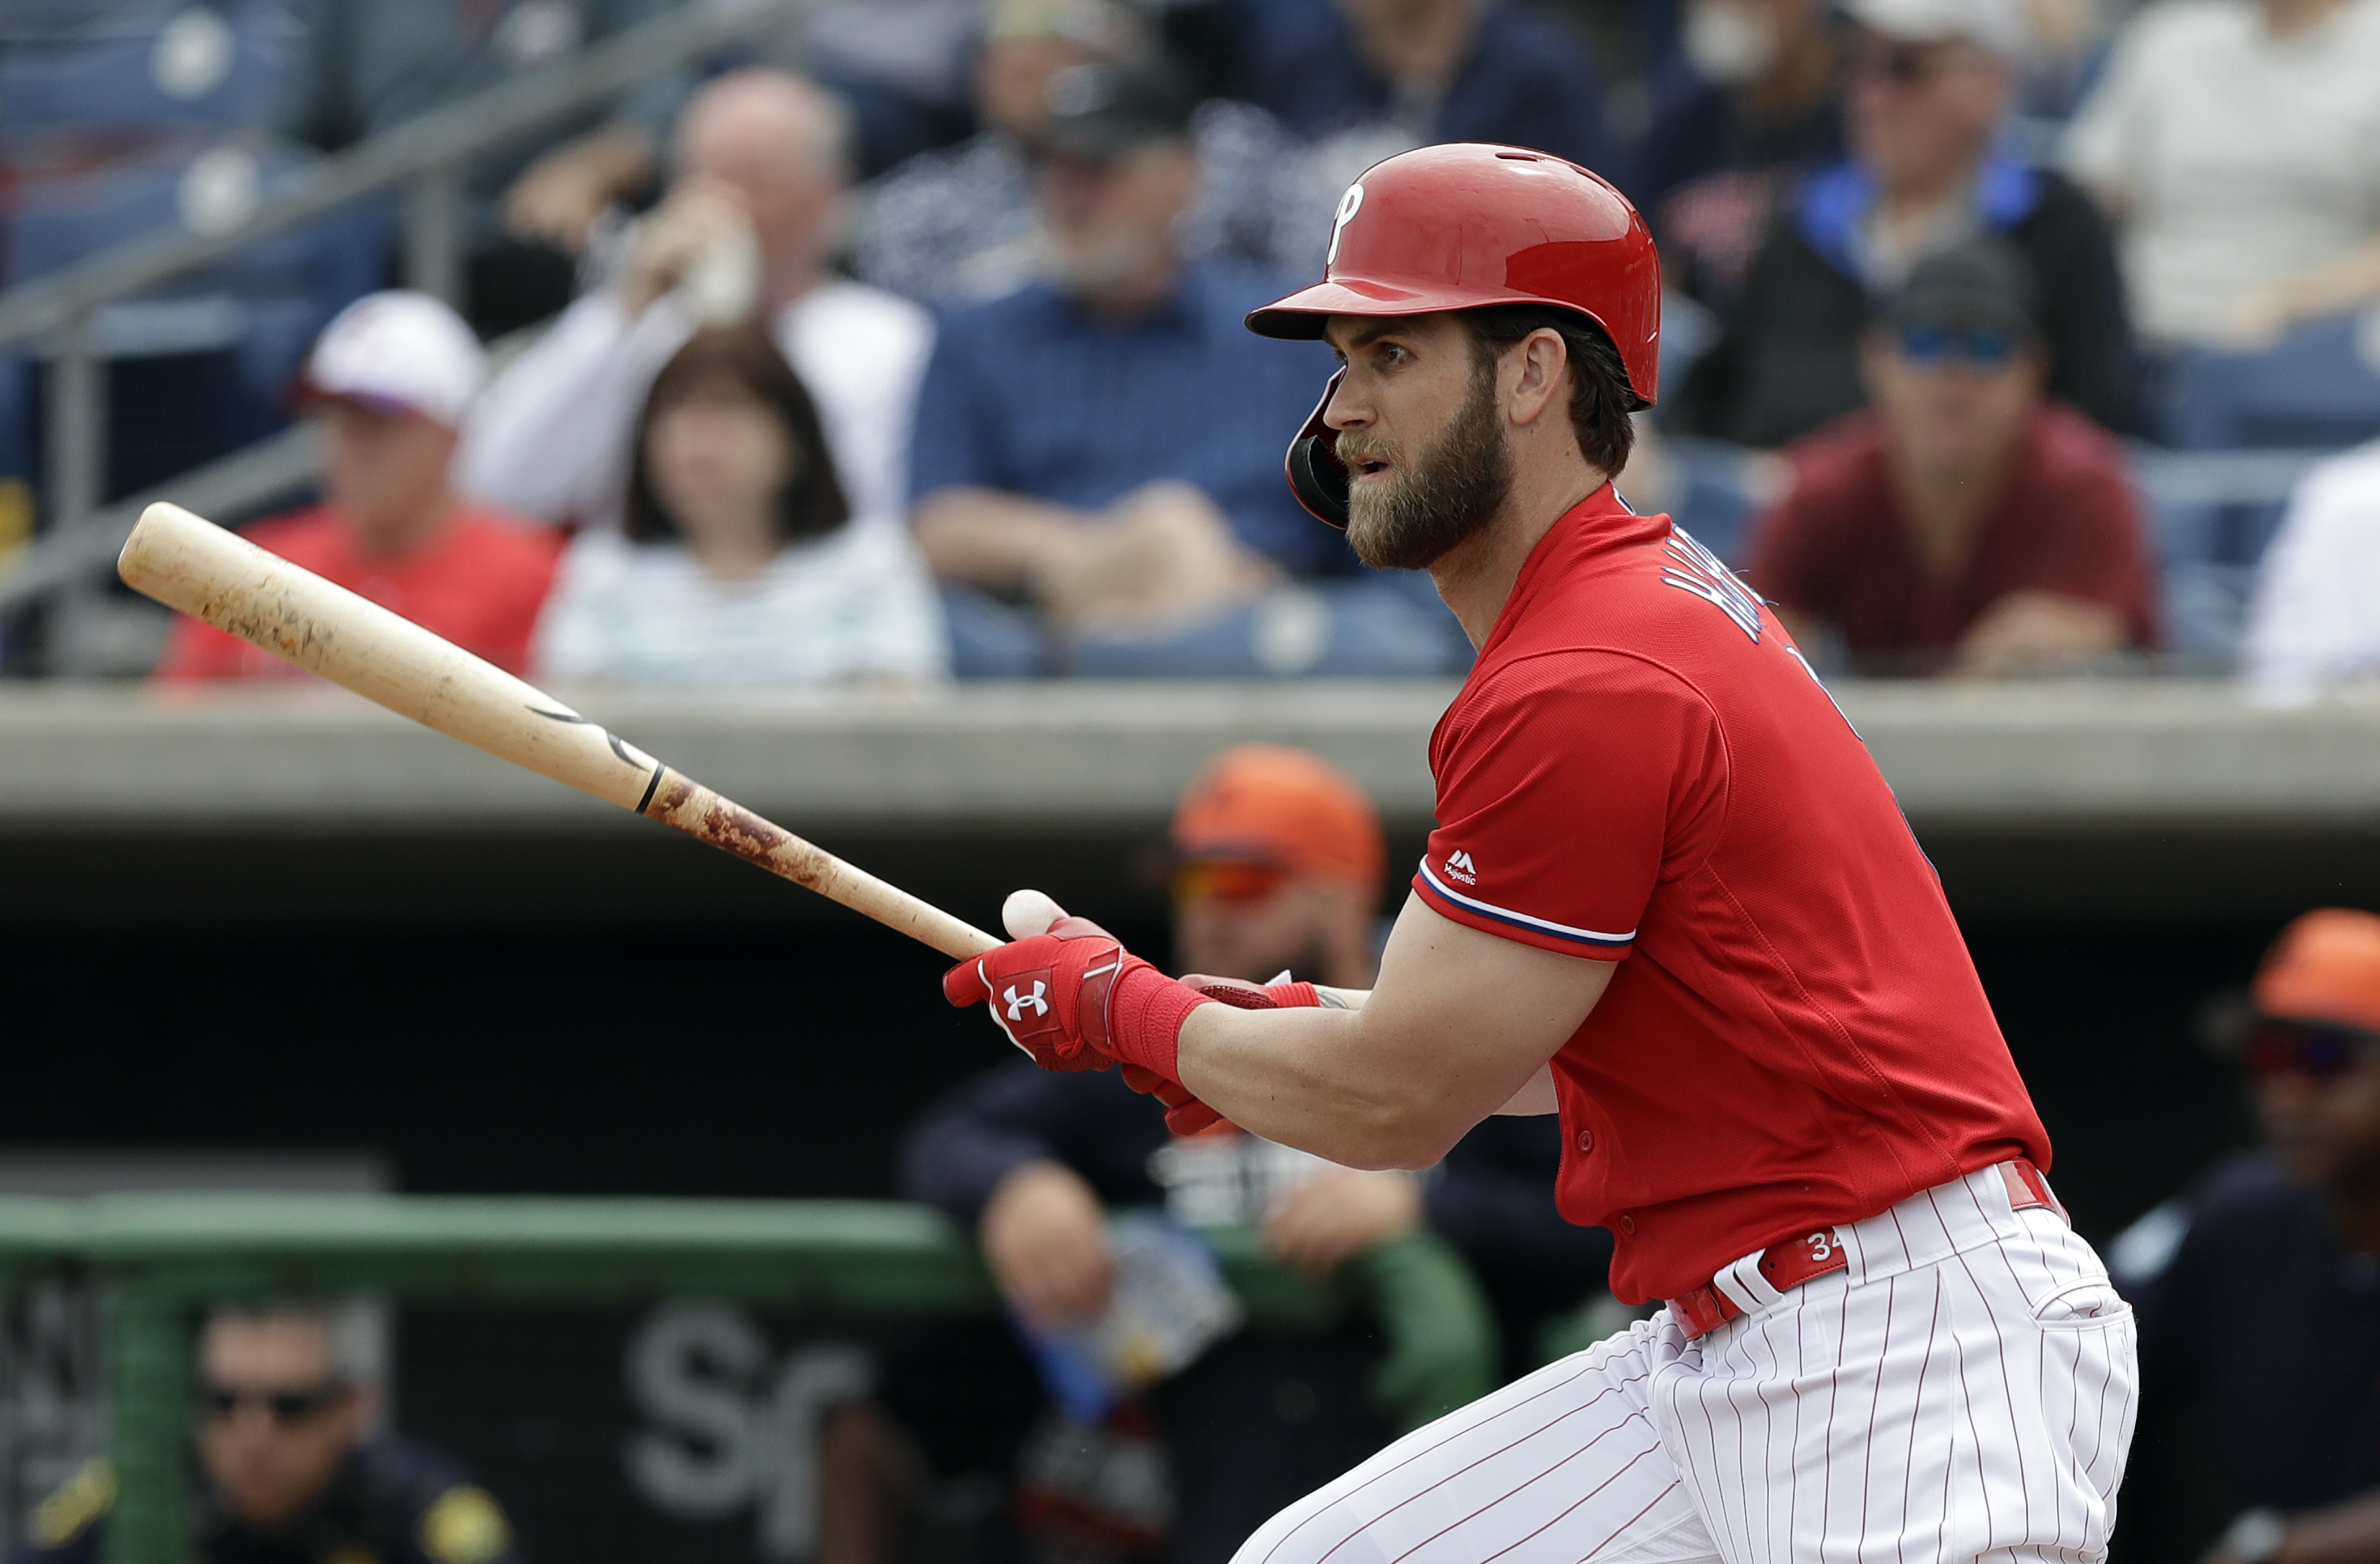 Bryce Harper gets his 1st hit of spring training